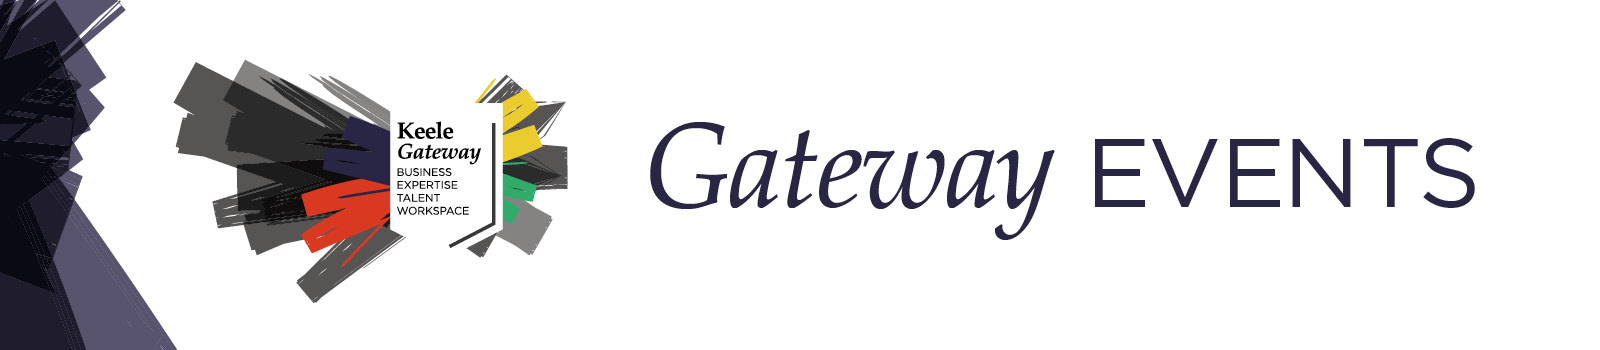 Events banner for Keele Gateway 